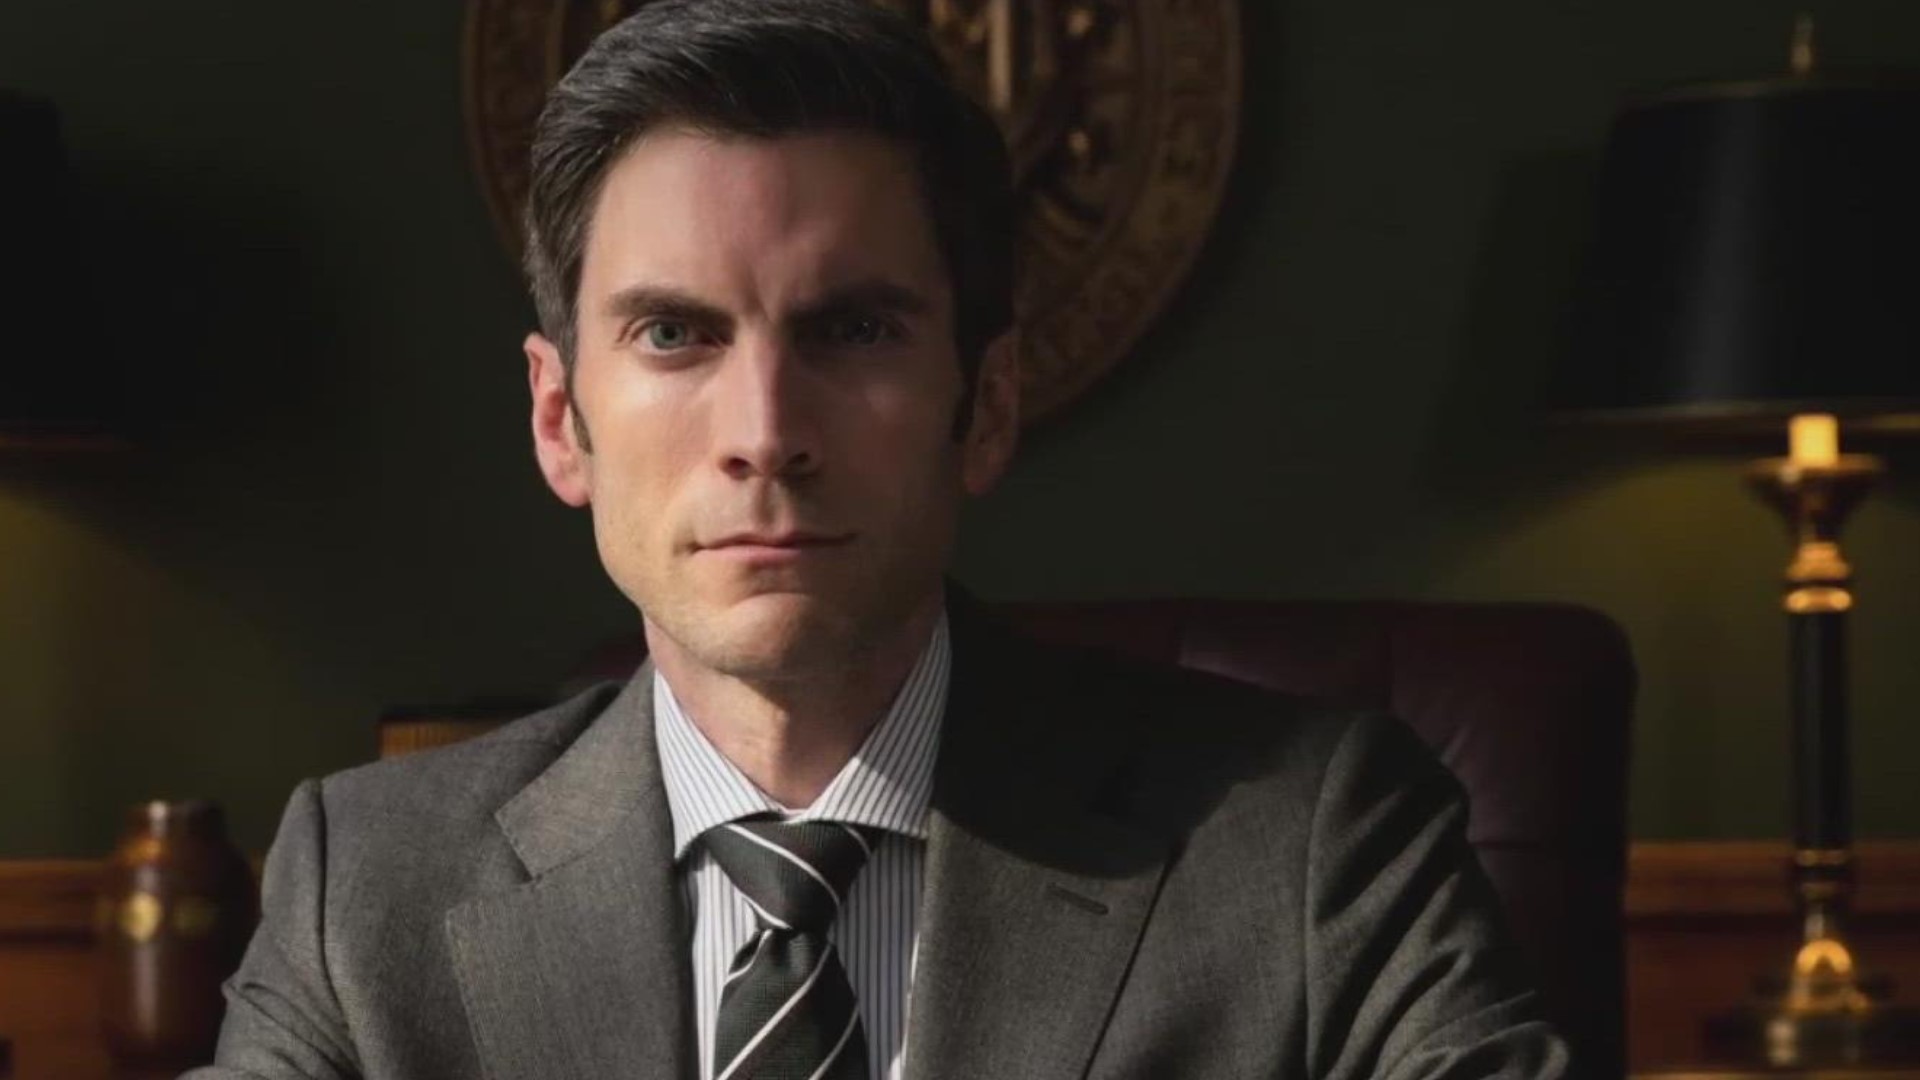 Before he was starring in one of TVs most popular shows, Wes Bentley was making a name for himself at Sylvan Hills High School with the help of his drama teacher.